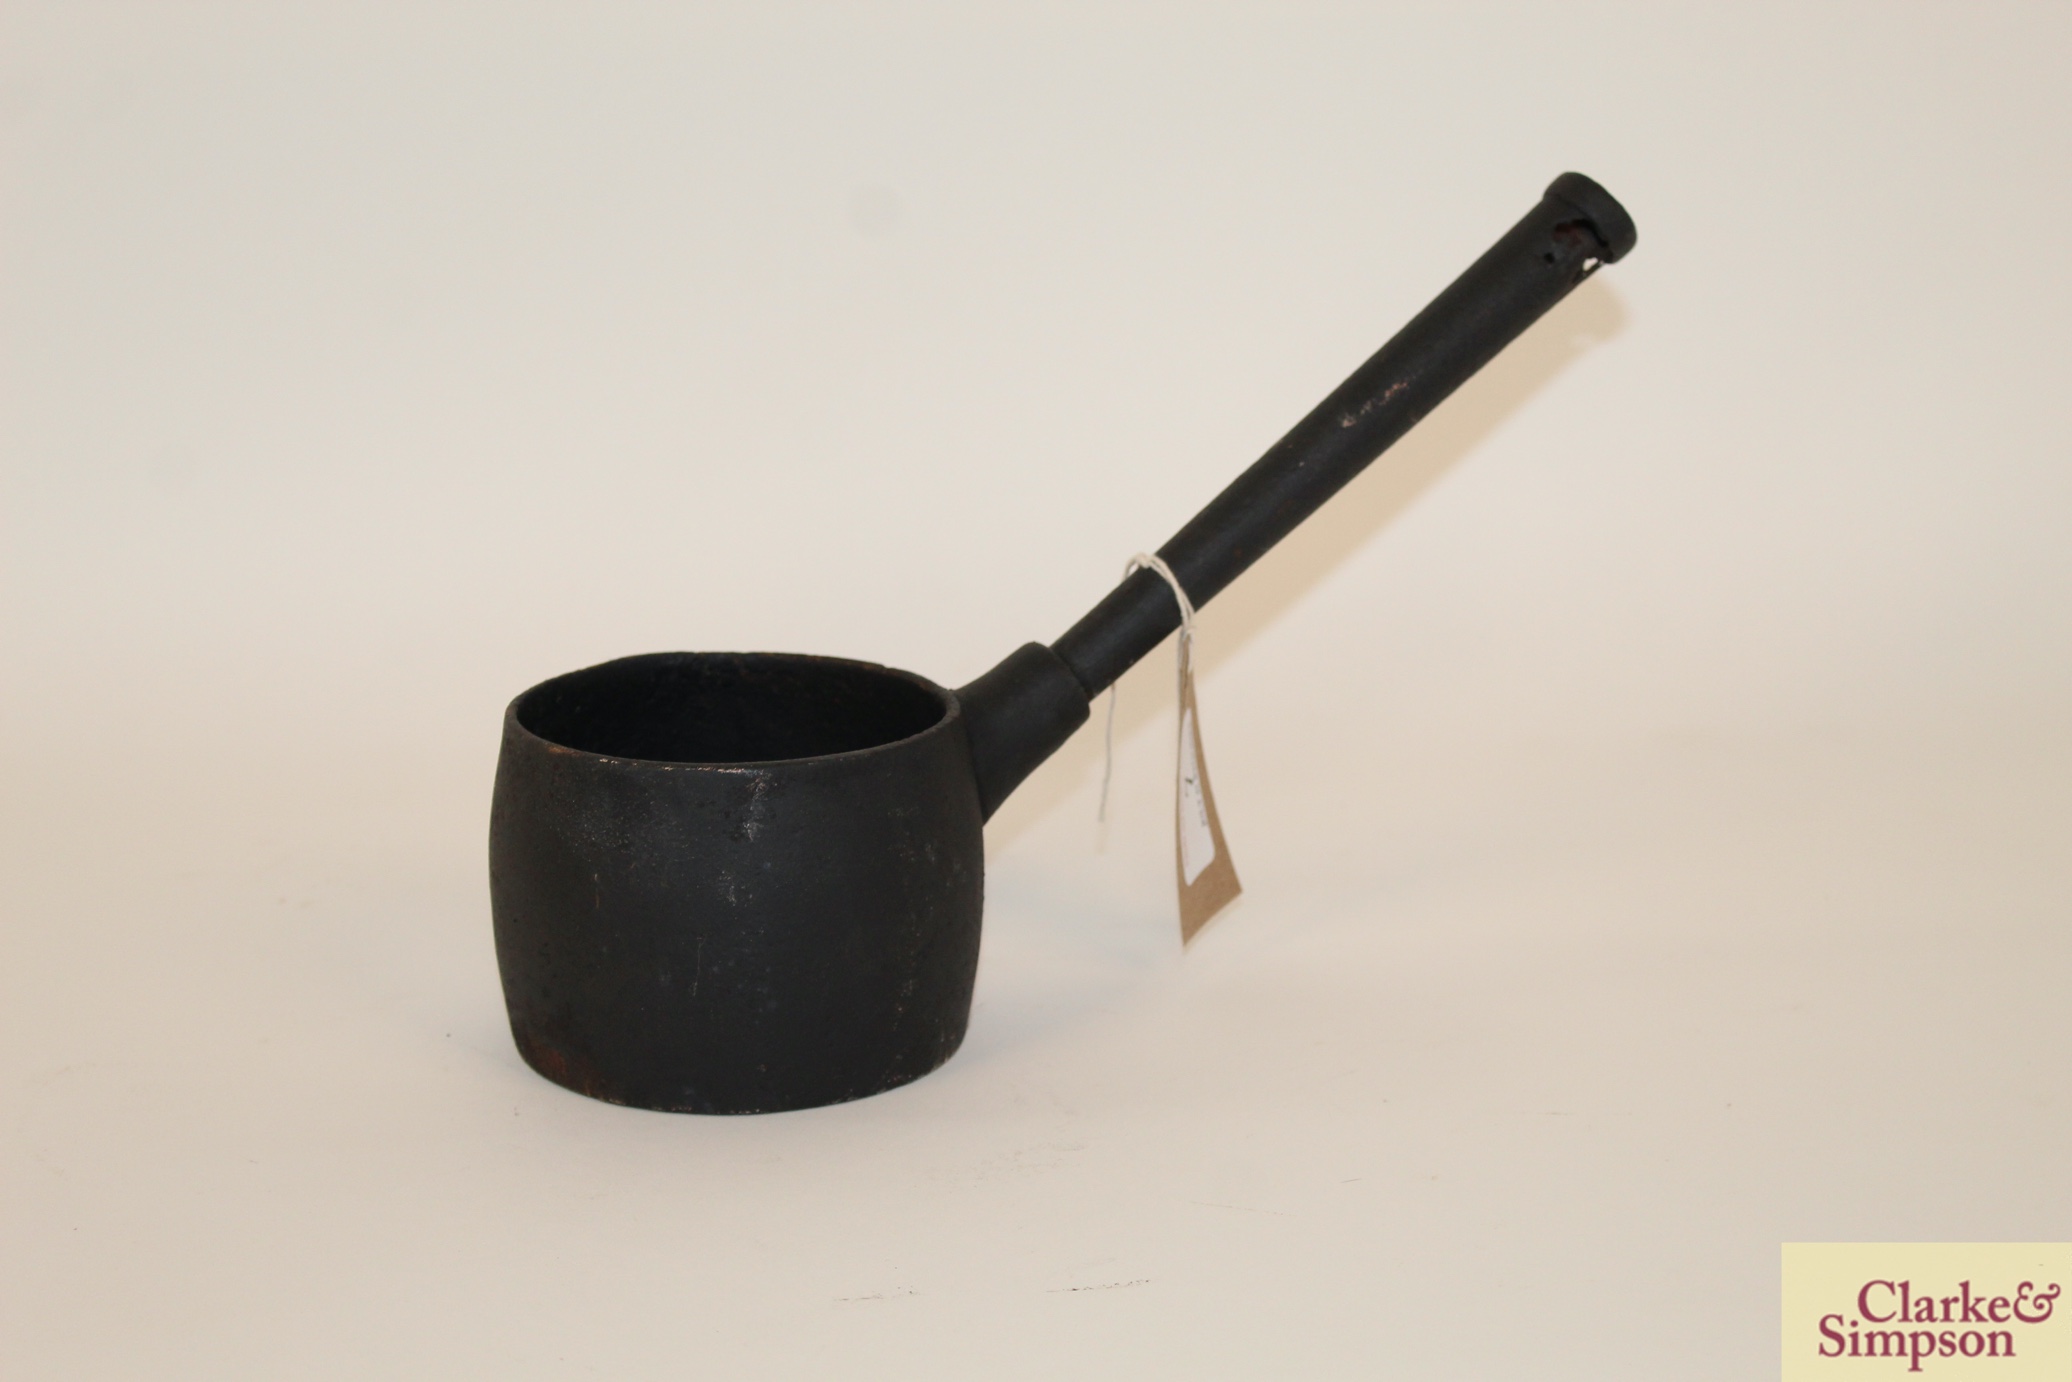 A small vintage cast iron saucepan having rounded